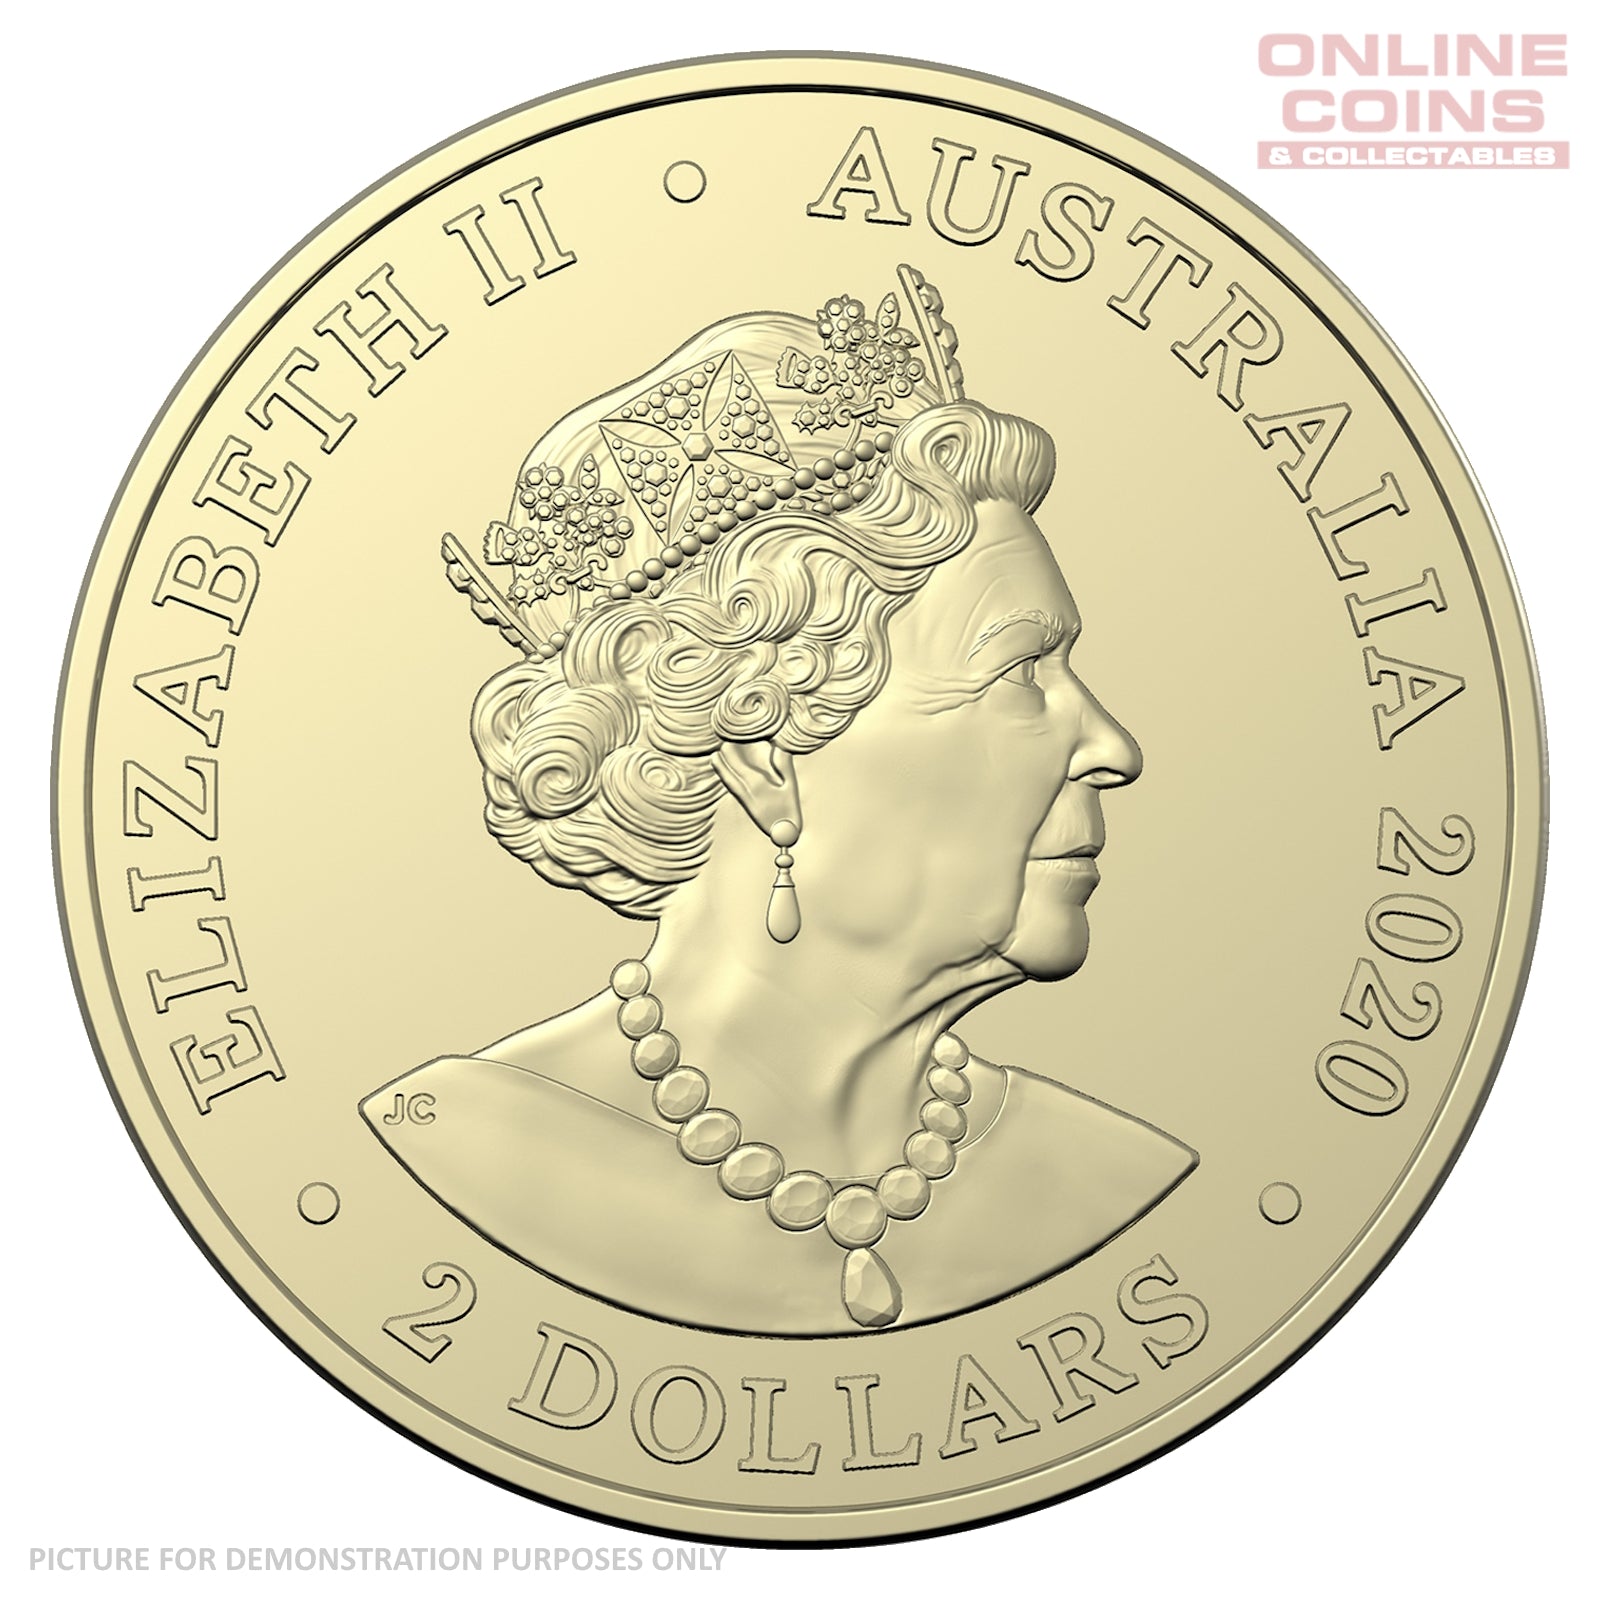 Buy Royal Australian Mint Gold & Silver Bullion Products In Store or Online